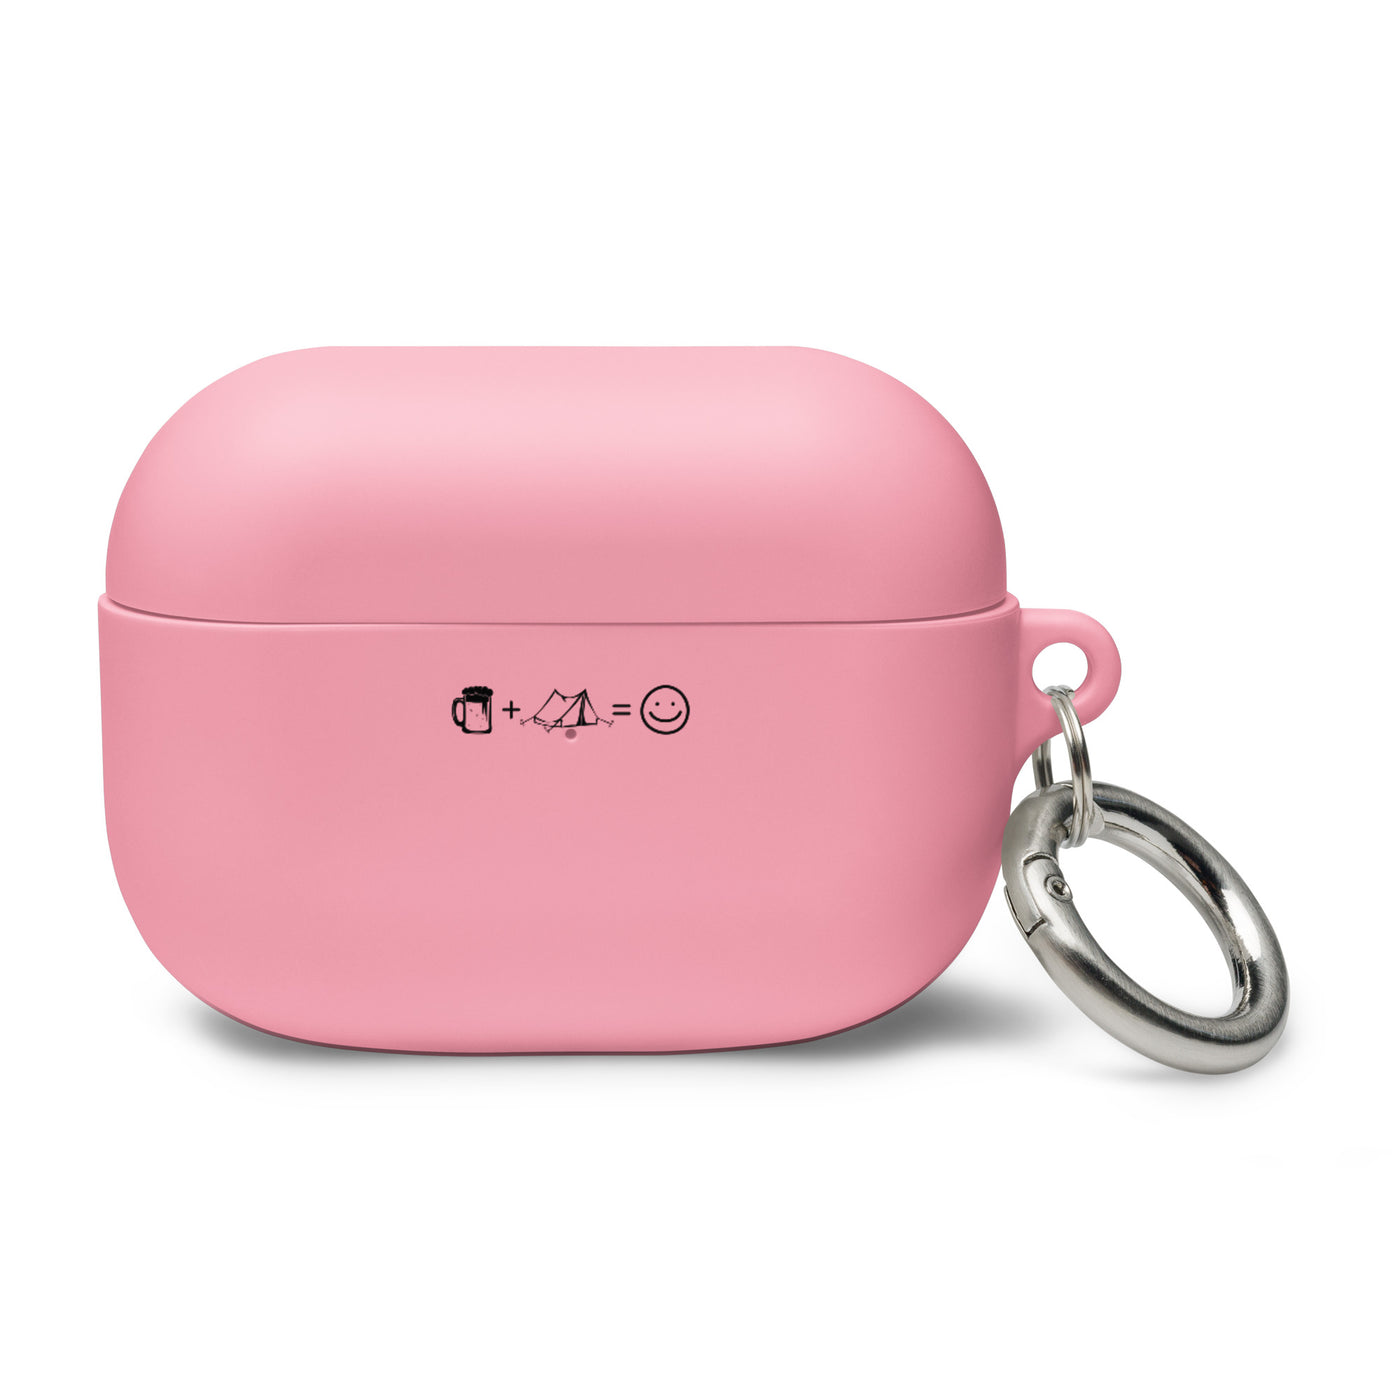 Bier, Lächeln Und Camping 1 - AirPods Case camping Pink AirPods Pro